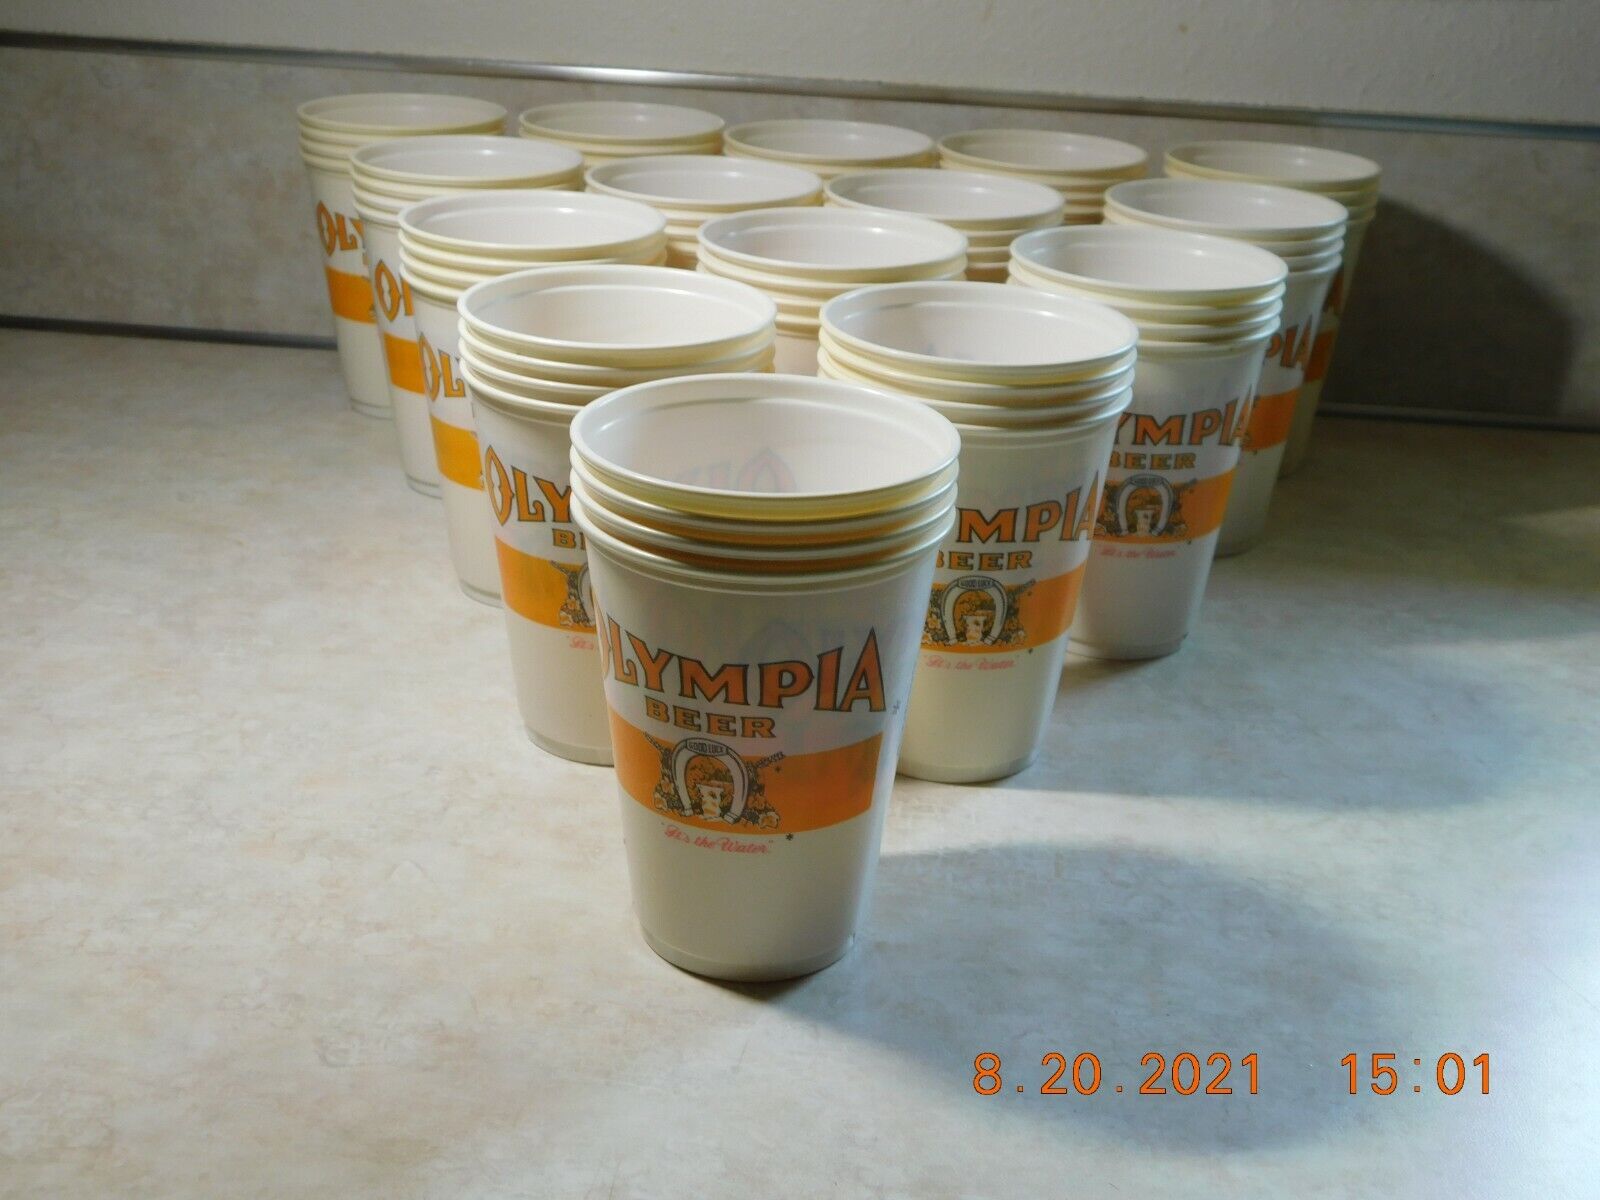 70's 80's OLYMPIA BEER Keg "It's the Water" Cups 12 oz SOLO NEW Unused  Без бренда - фотография #4